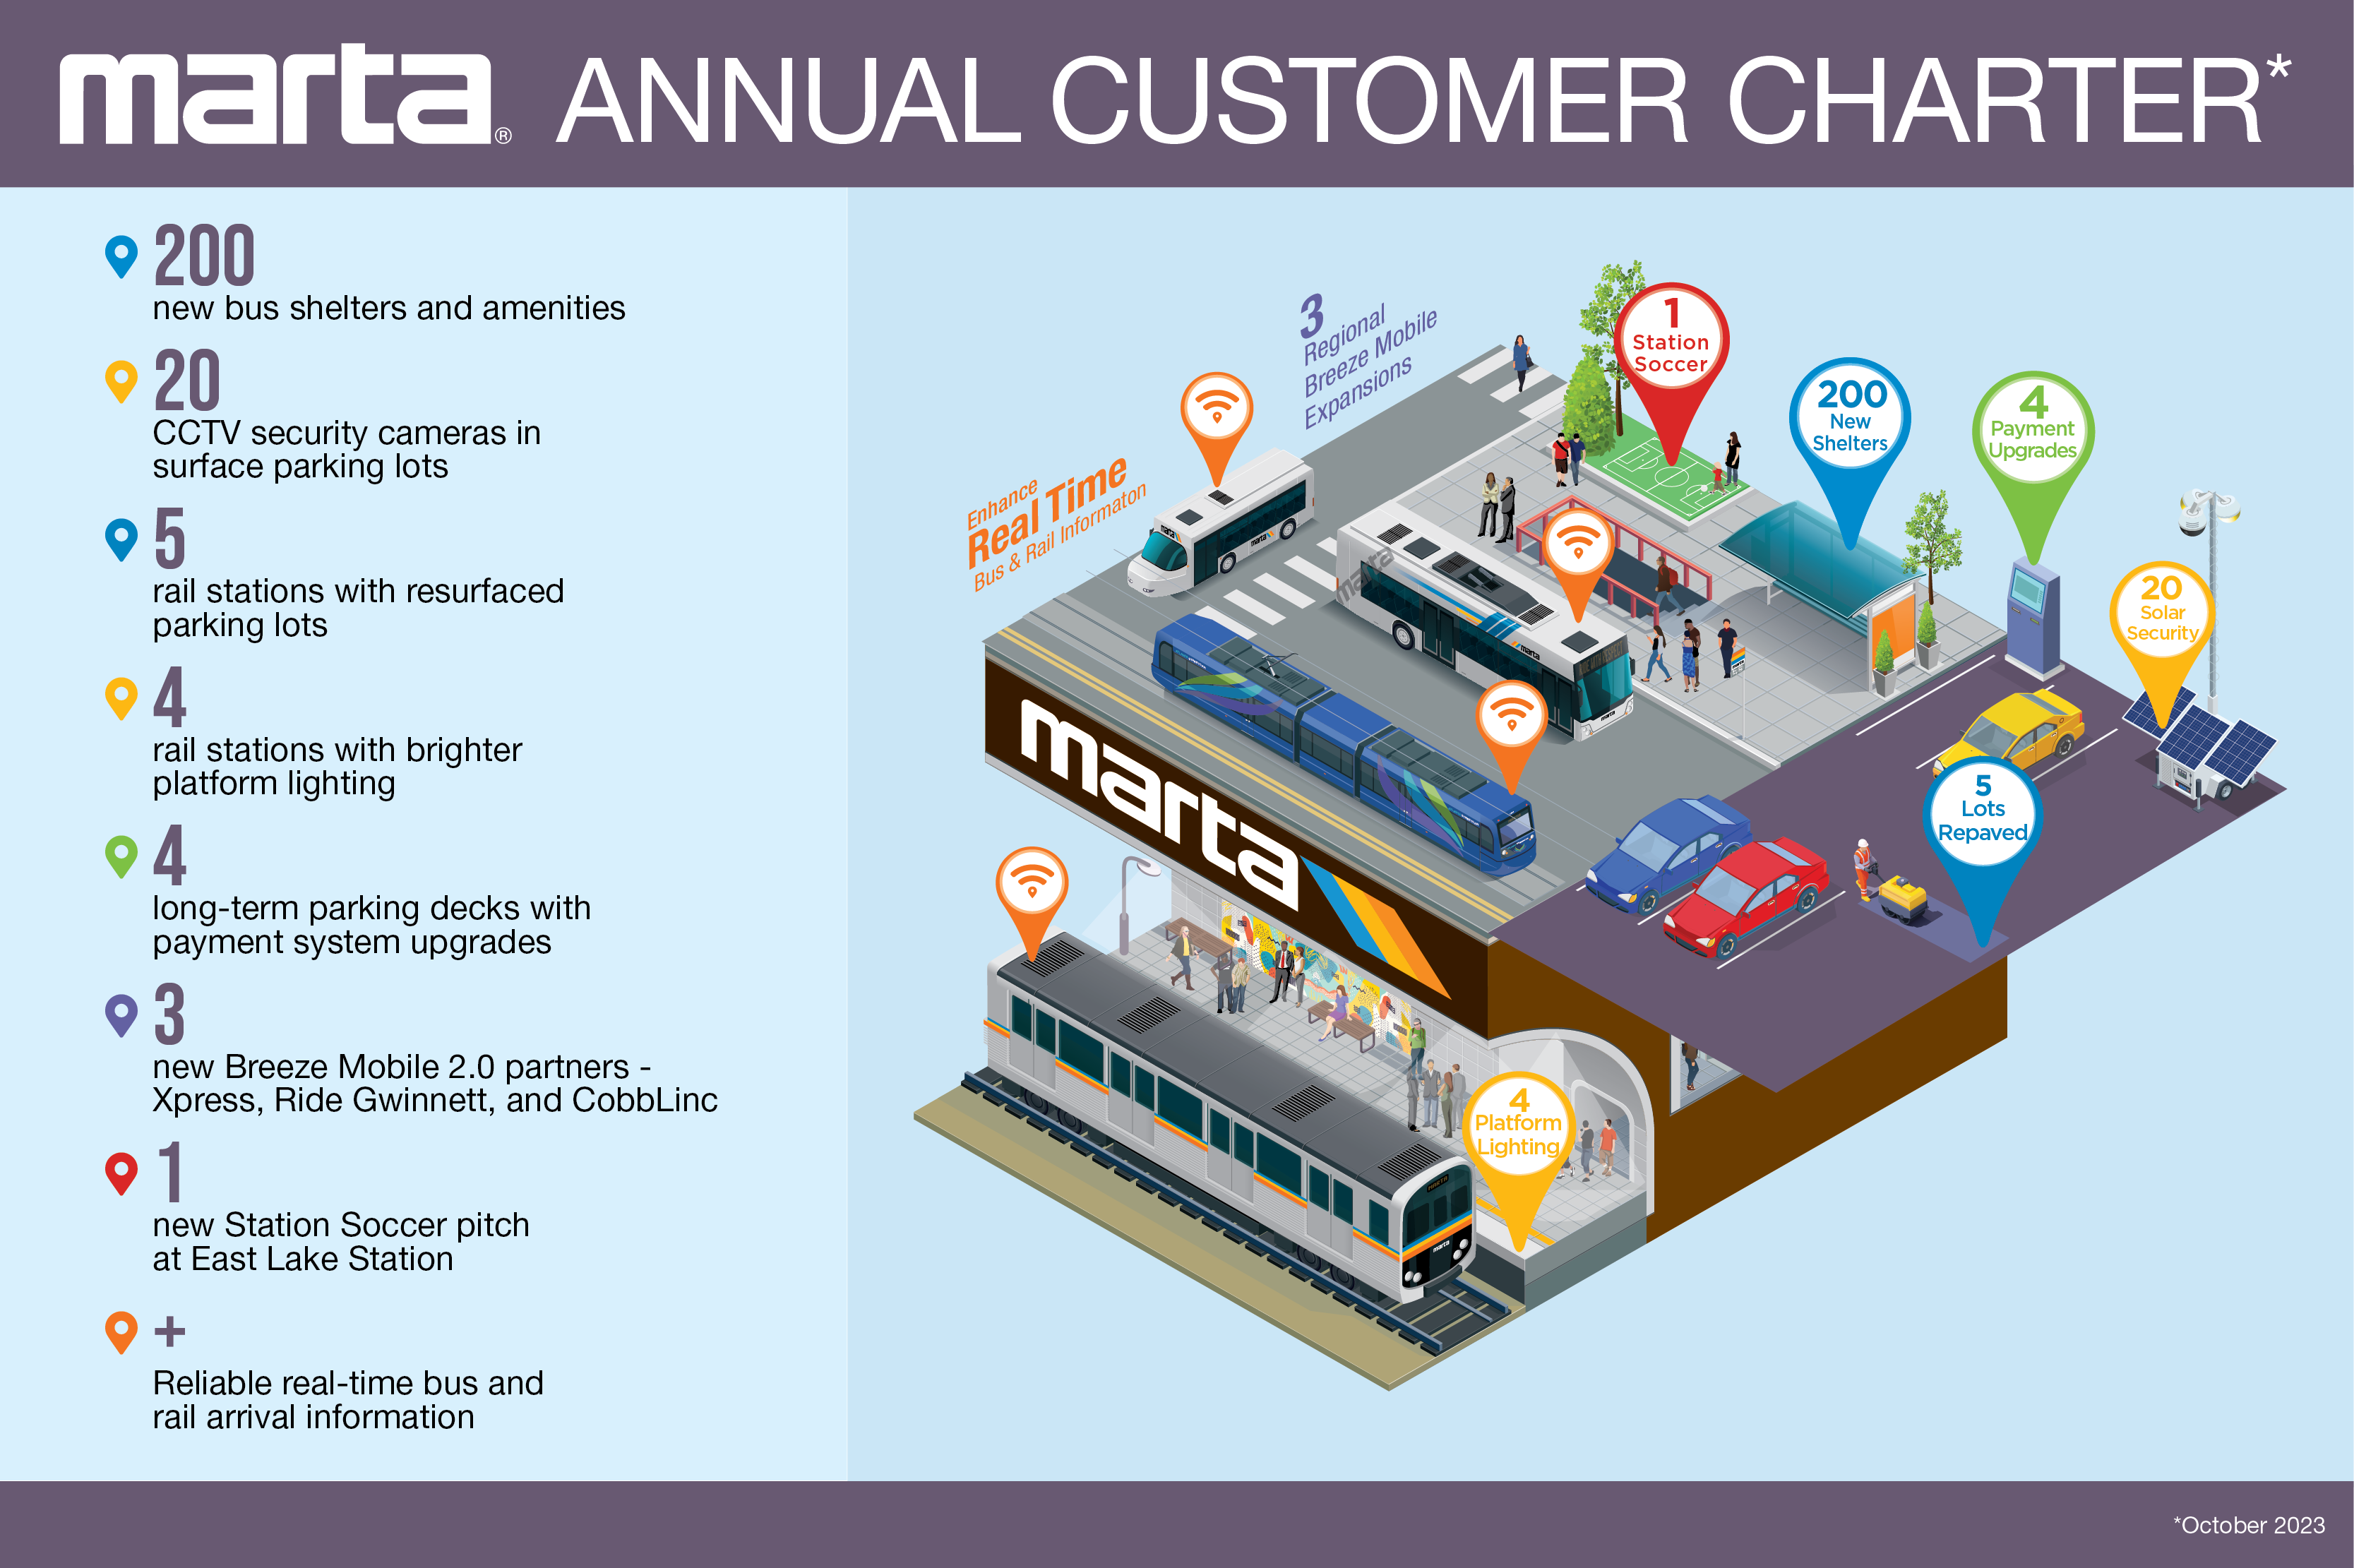 AnnualCharter Infographic for CX - Landing Page 800 x 533 (1)